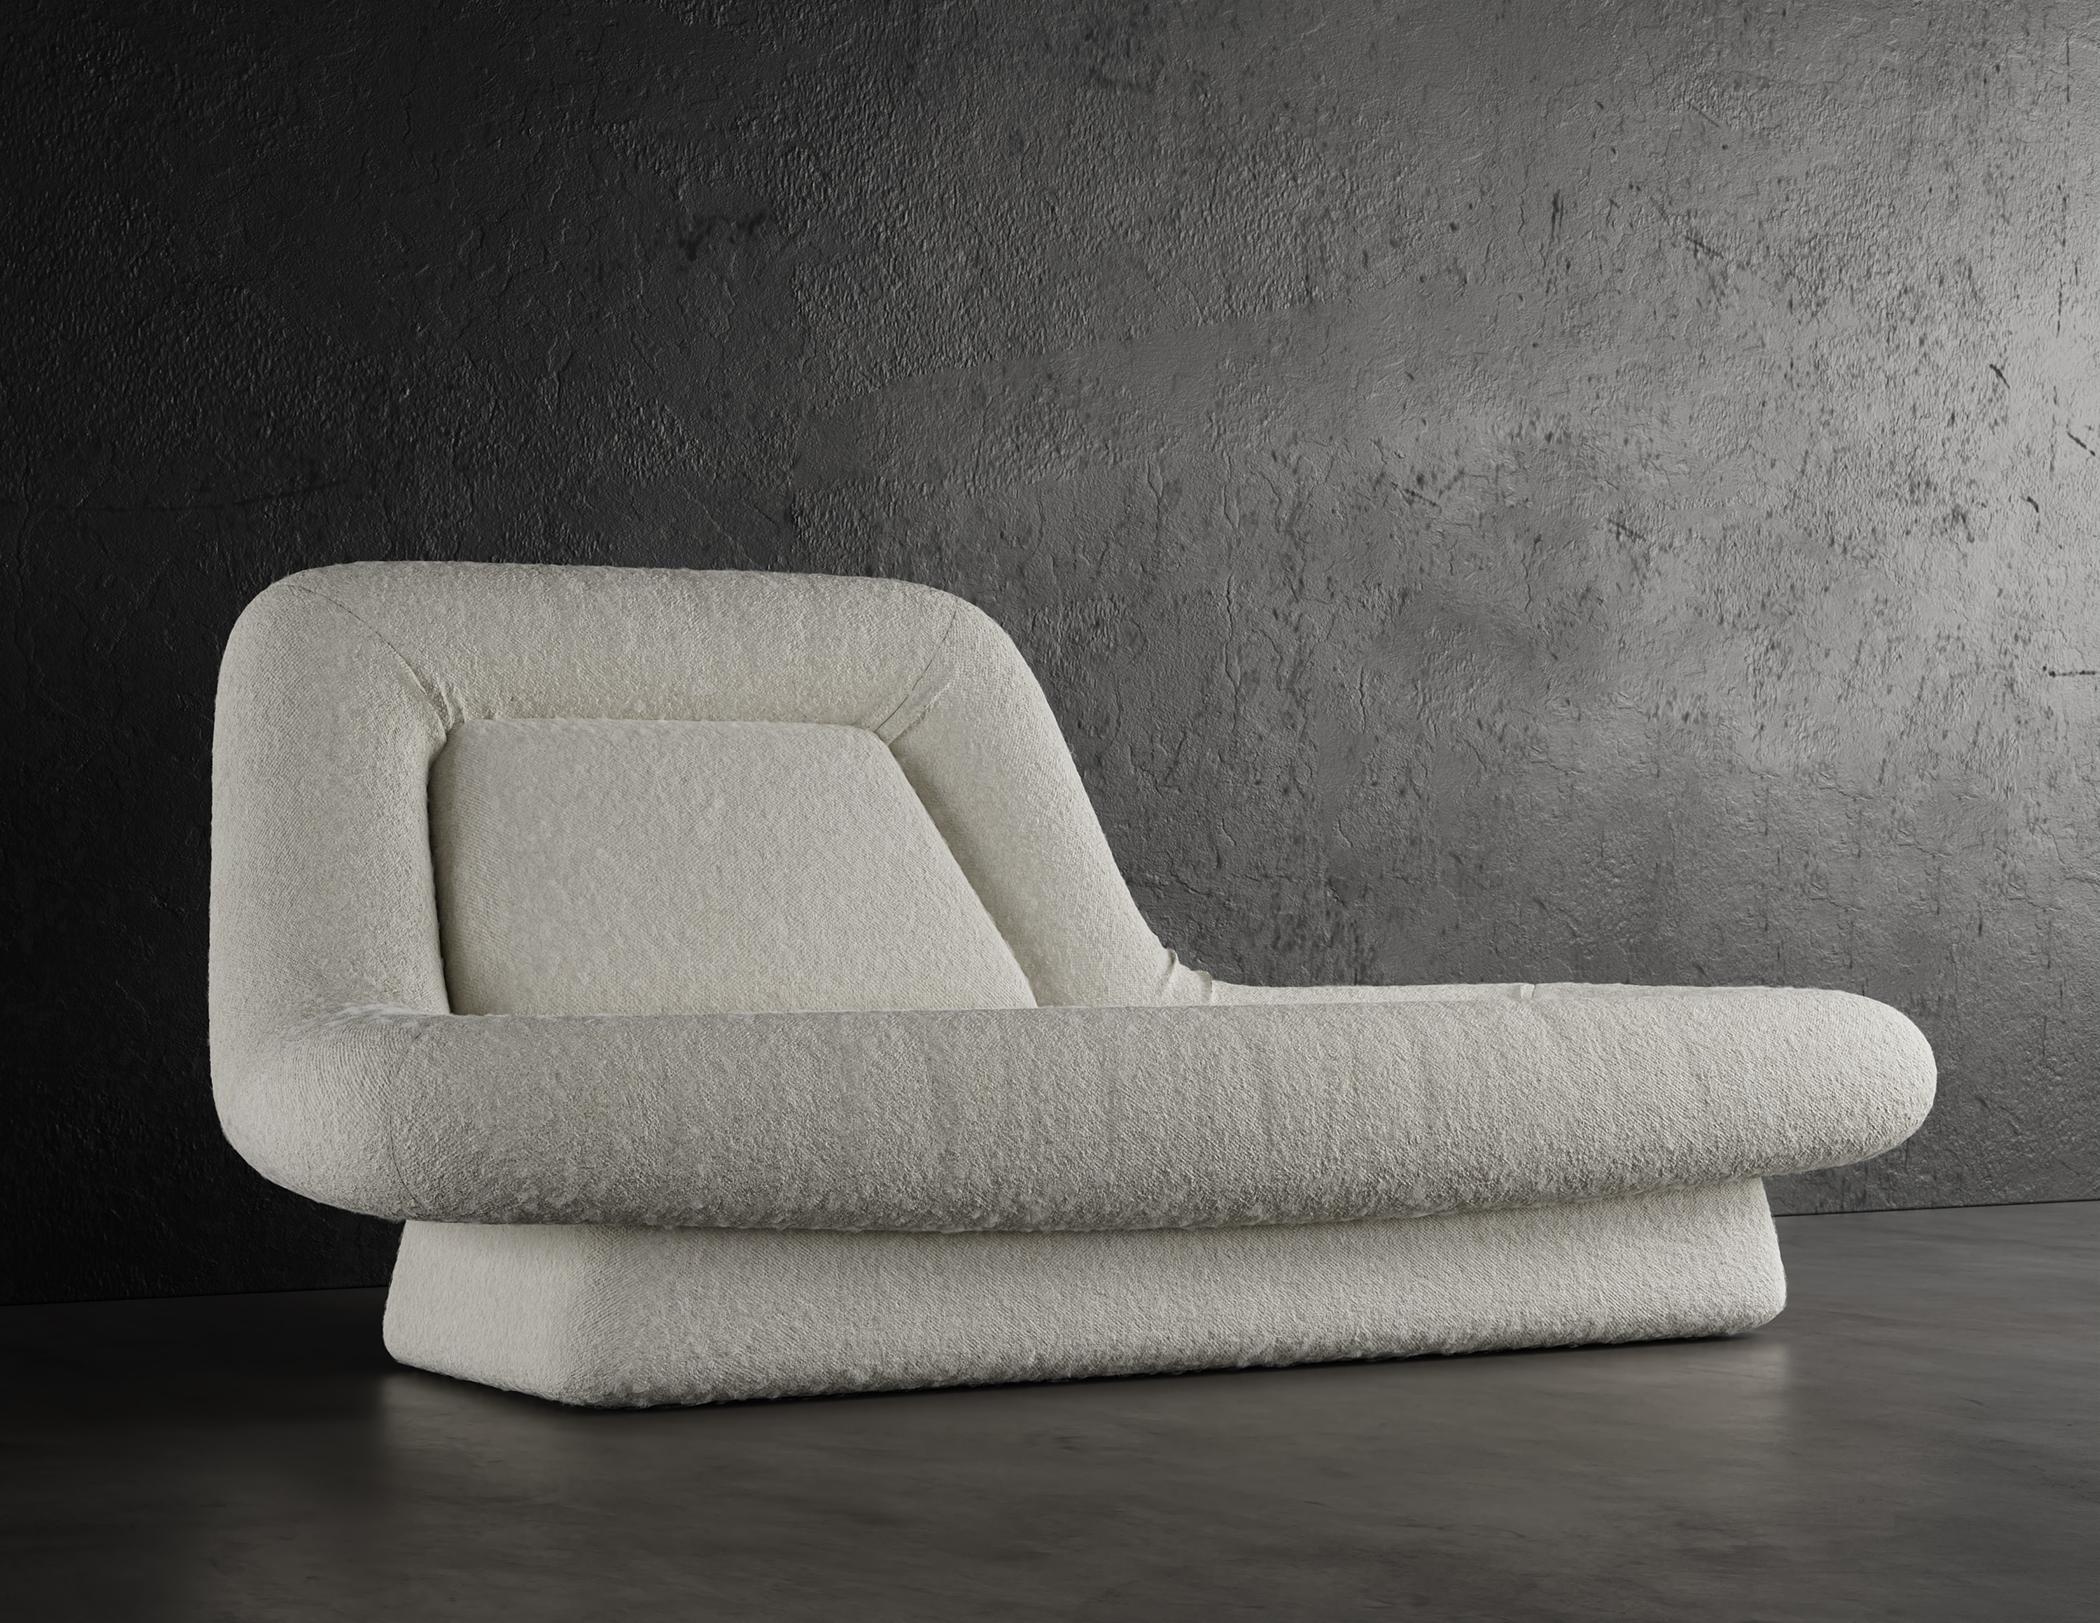 WAVE CHAISE LOUNGE - Modern Design in Cloud Boucle in Warm White

The Wave Chaise Lounge is a modern and stylish piece of furniture that will add a touch of elegance to any room. It is upholstered in a luxurious cloud boucle fabric in warm white,